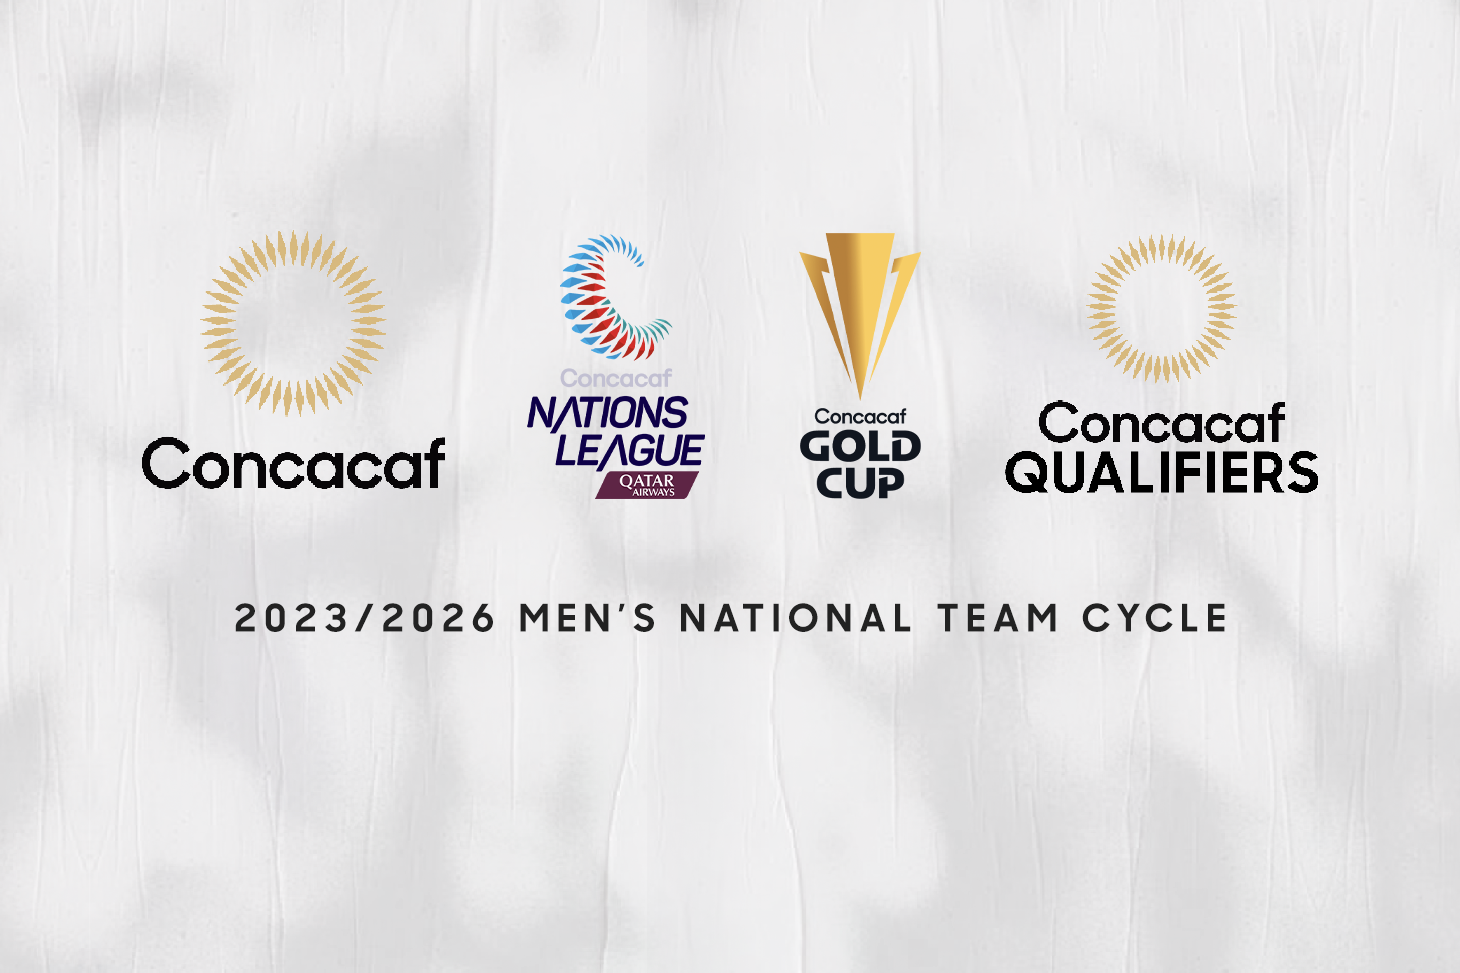 Concacaf Announces Revised 2022 FIFA World Cup Qualifying Schedule